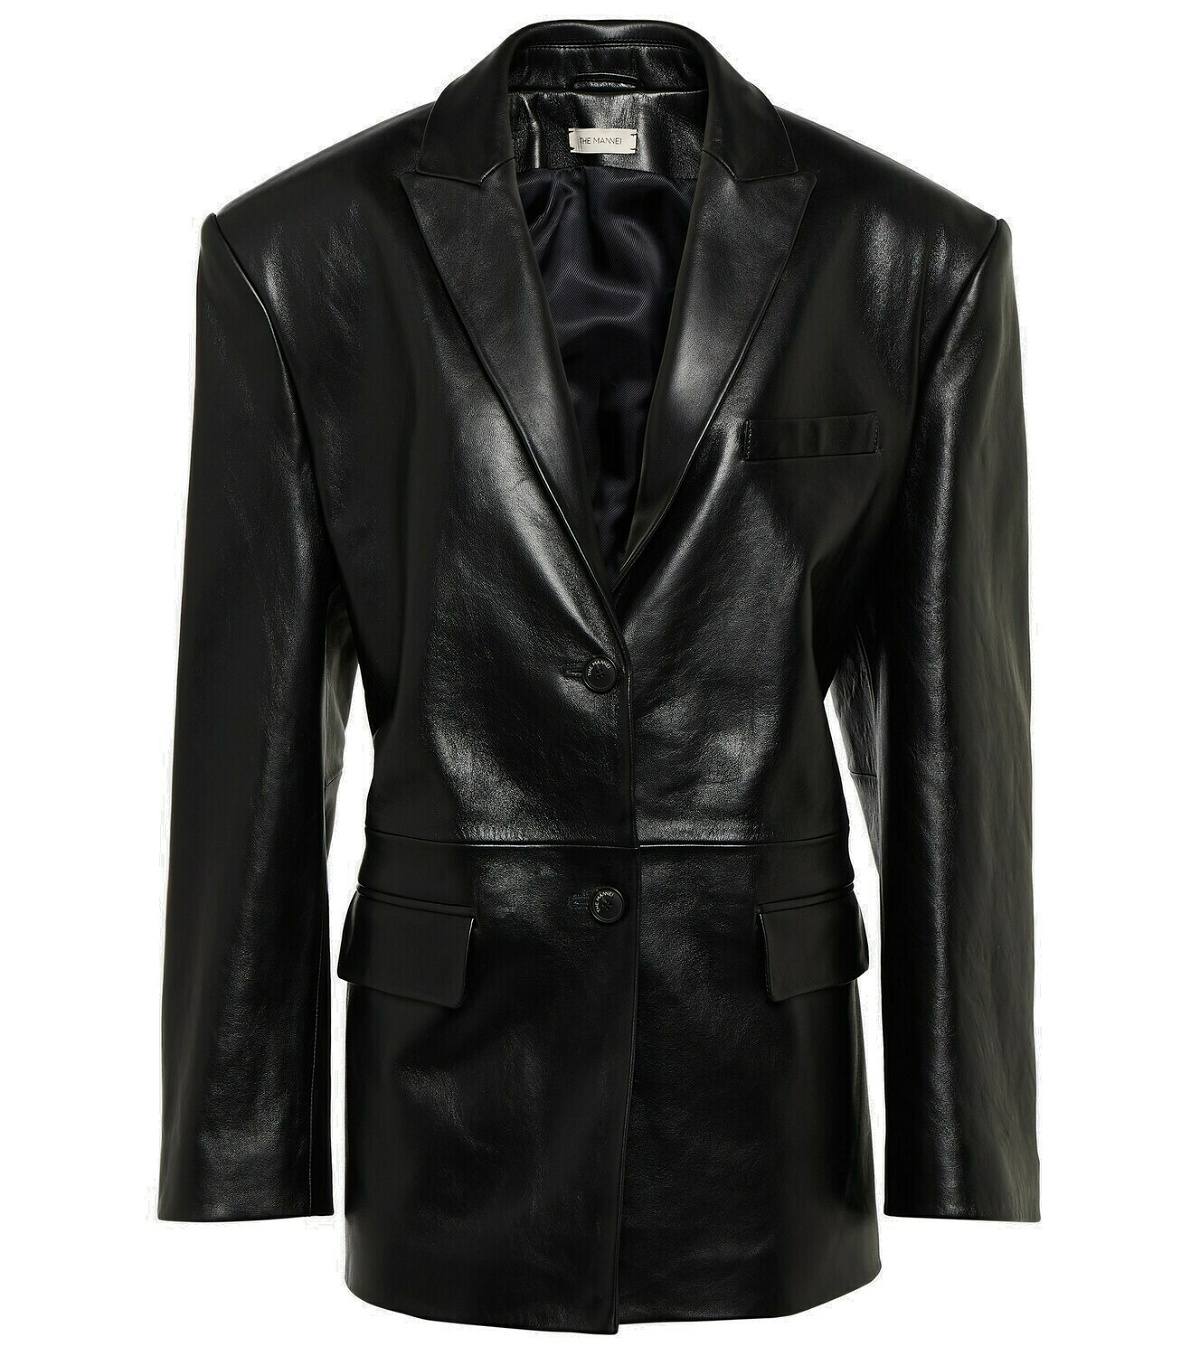 Photo: The Mannei Jafr tailored leather blazer